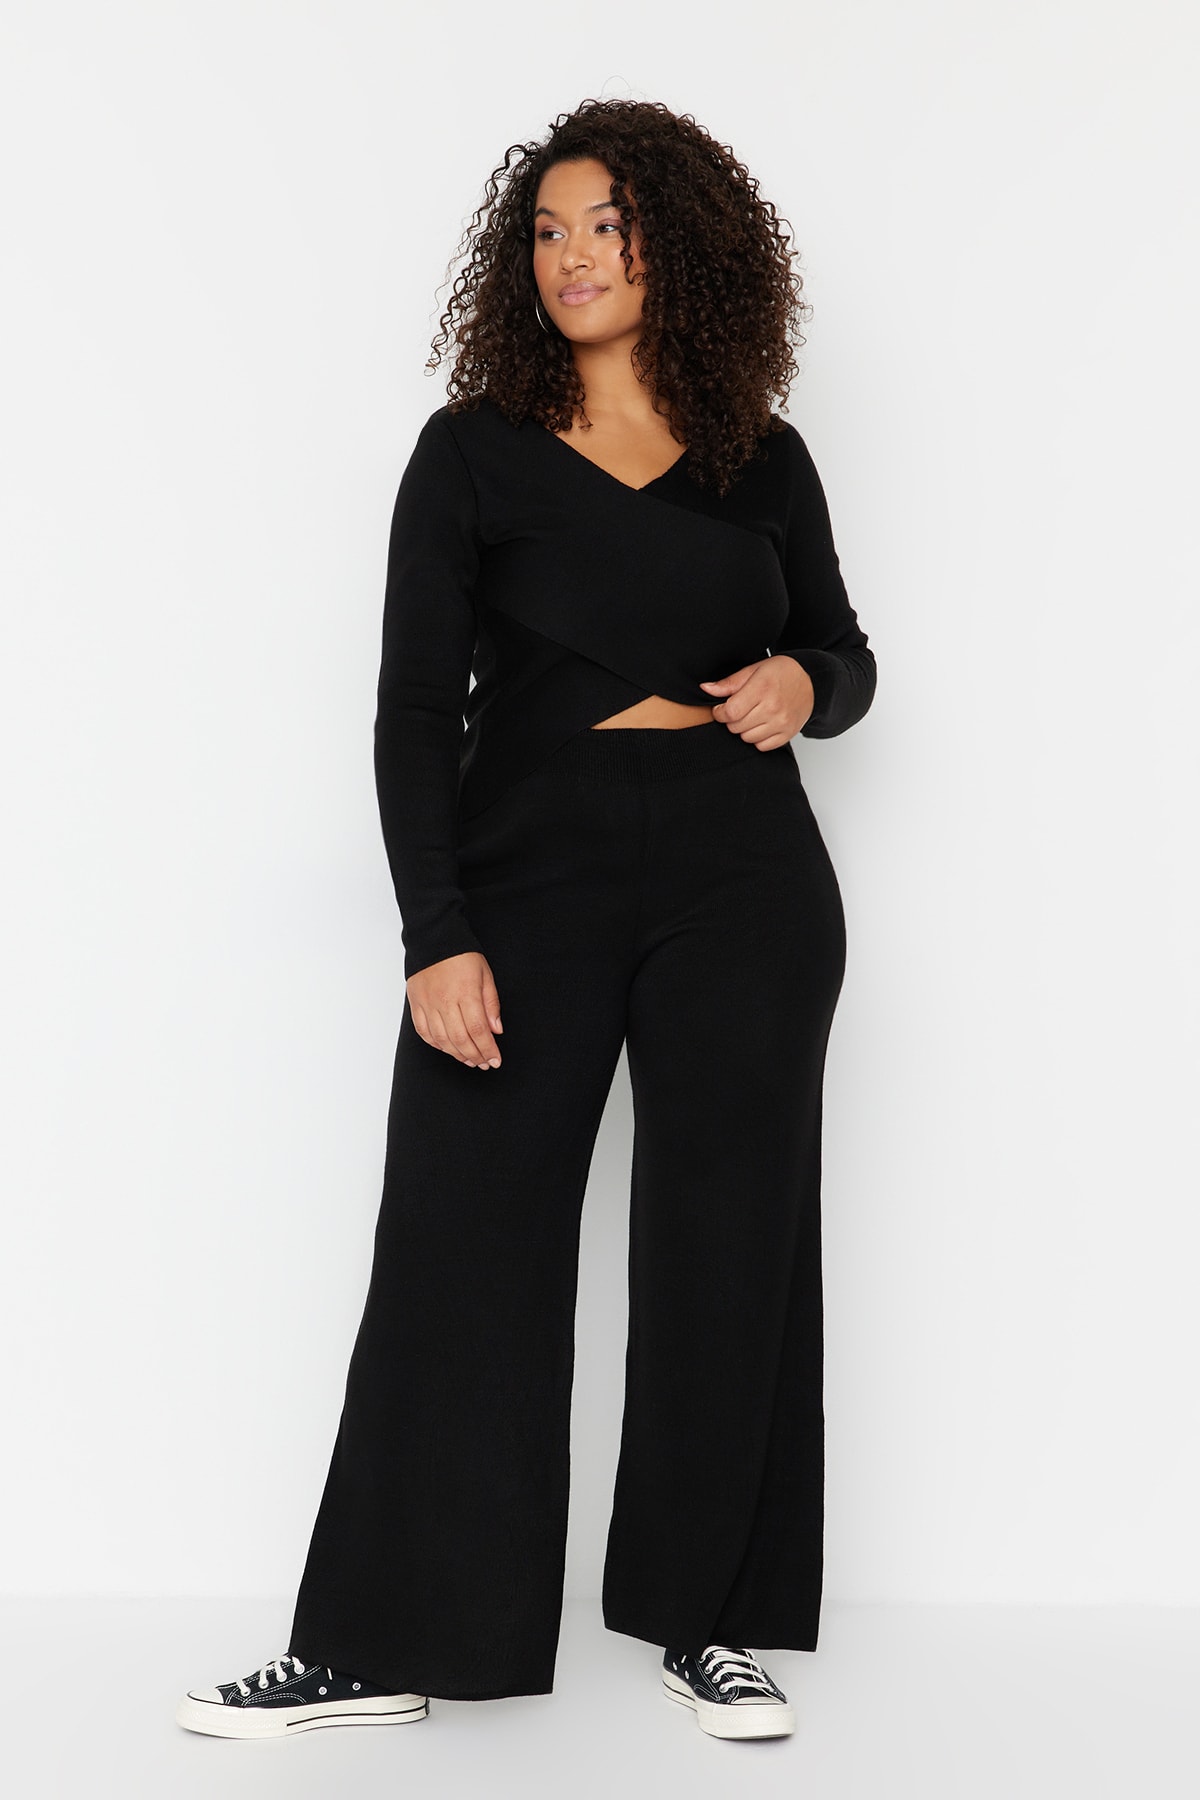 Trendyol Plus Size Black Double Breasted Knitwear Top and Bottom Set